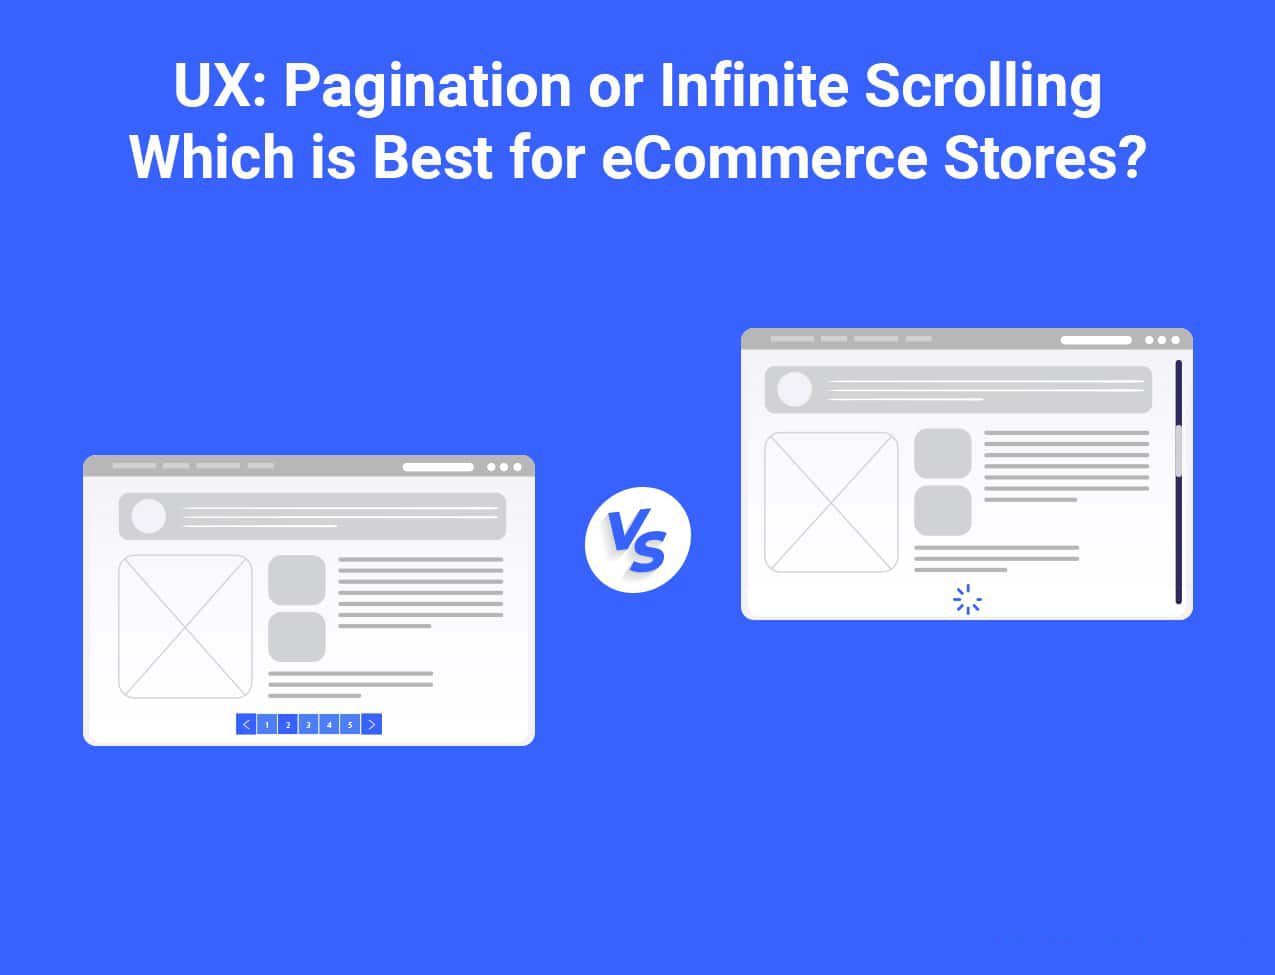 UX: Pagination or Infinite Scrolling – Which is Best for eCommerce Stores?